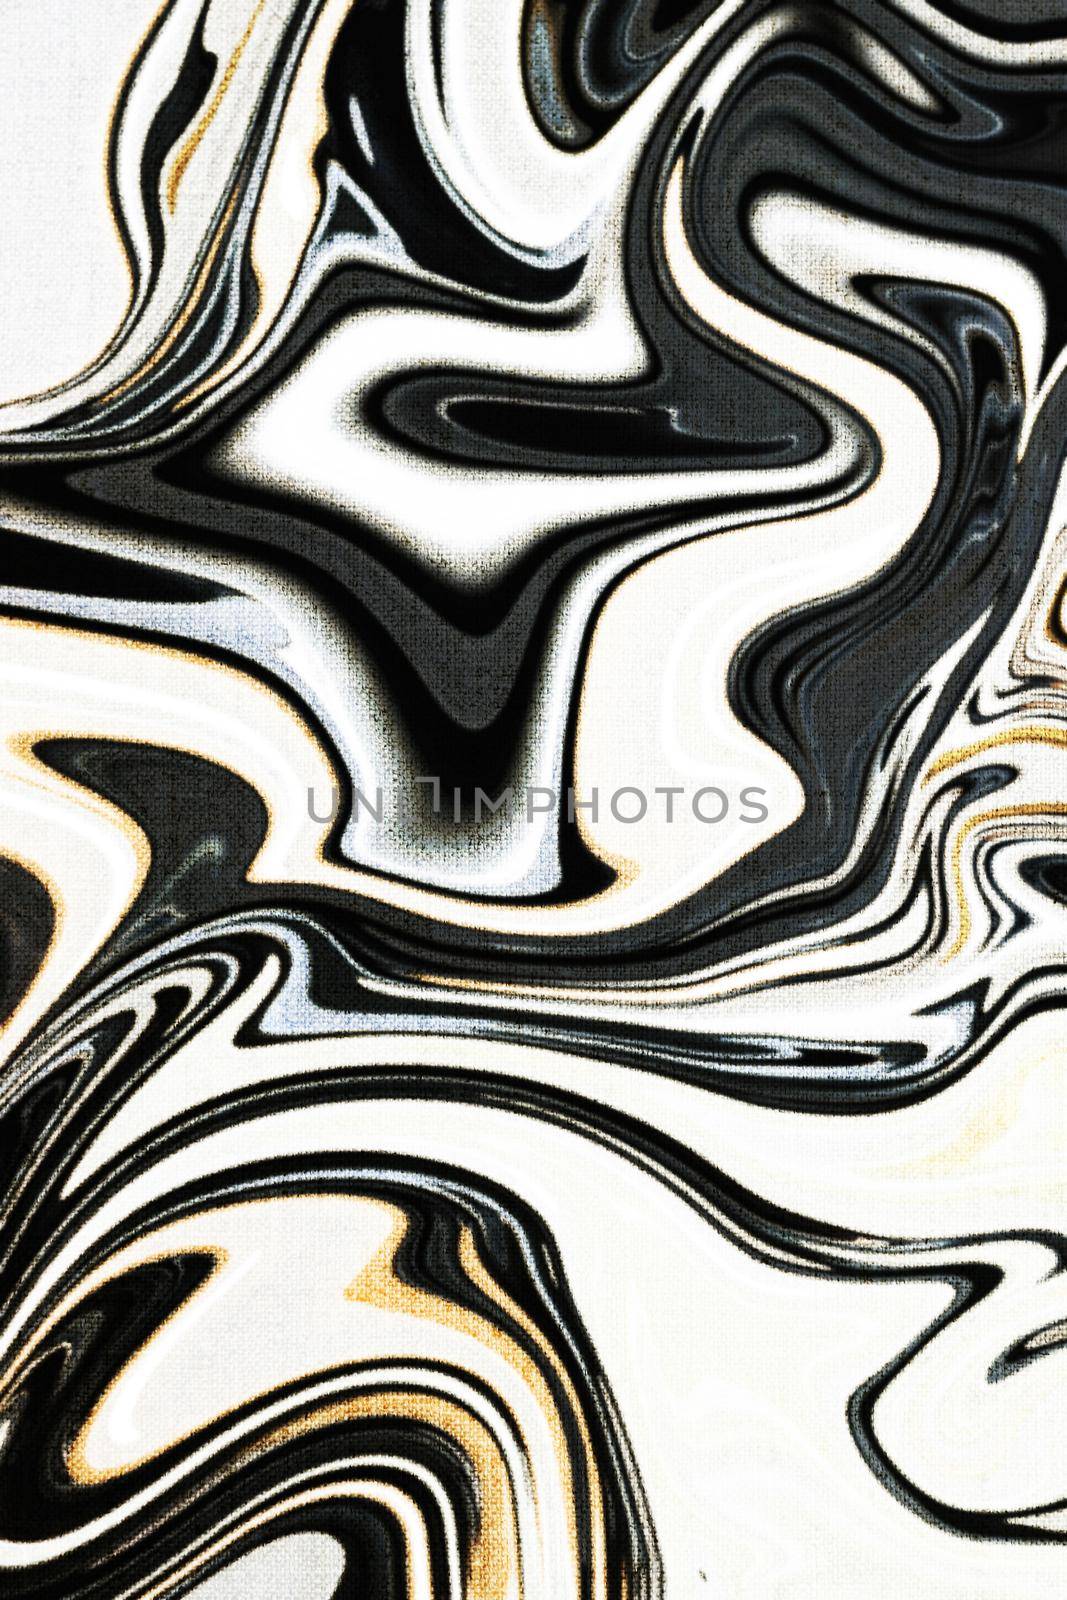 Interior design, home fabrics and wall decor concept - Marble texture textile background, abstract marbling art on canvas